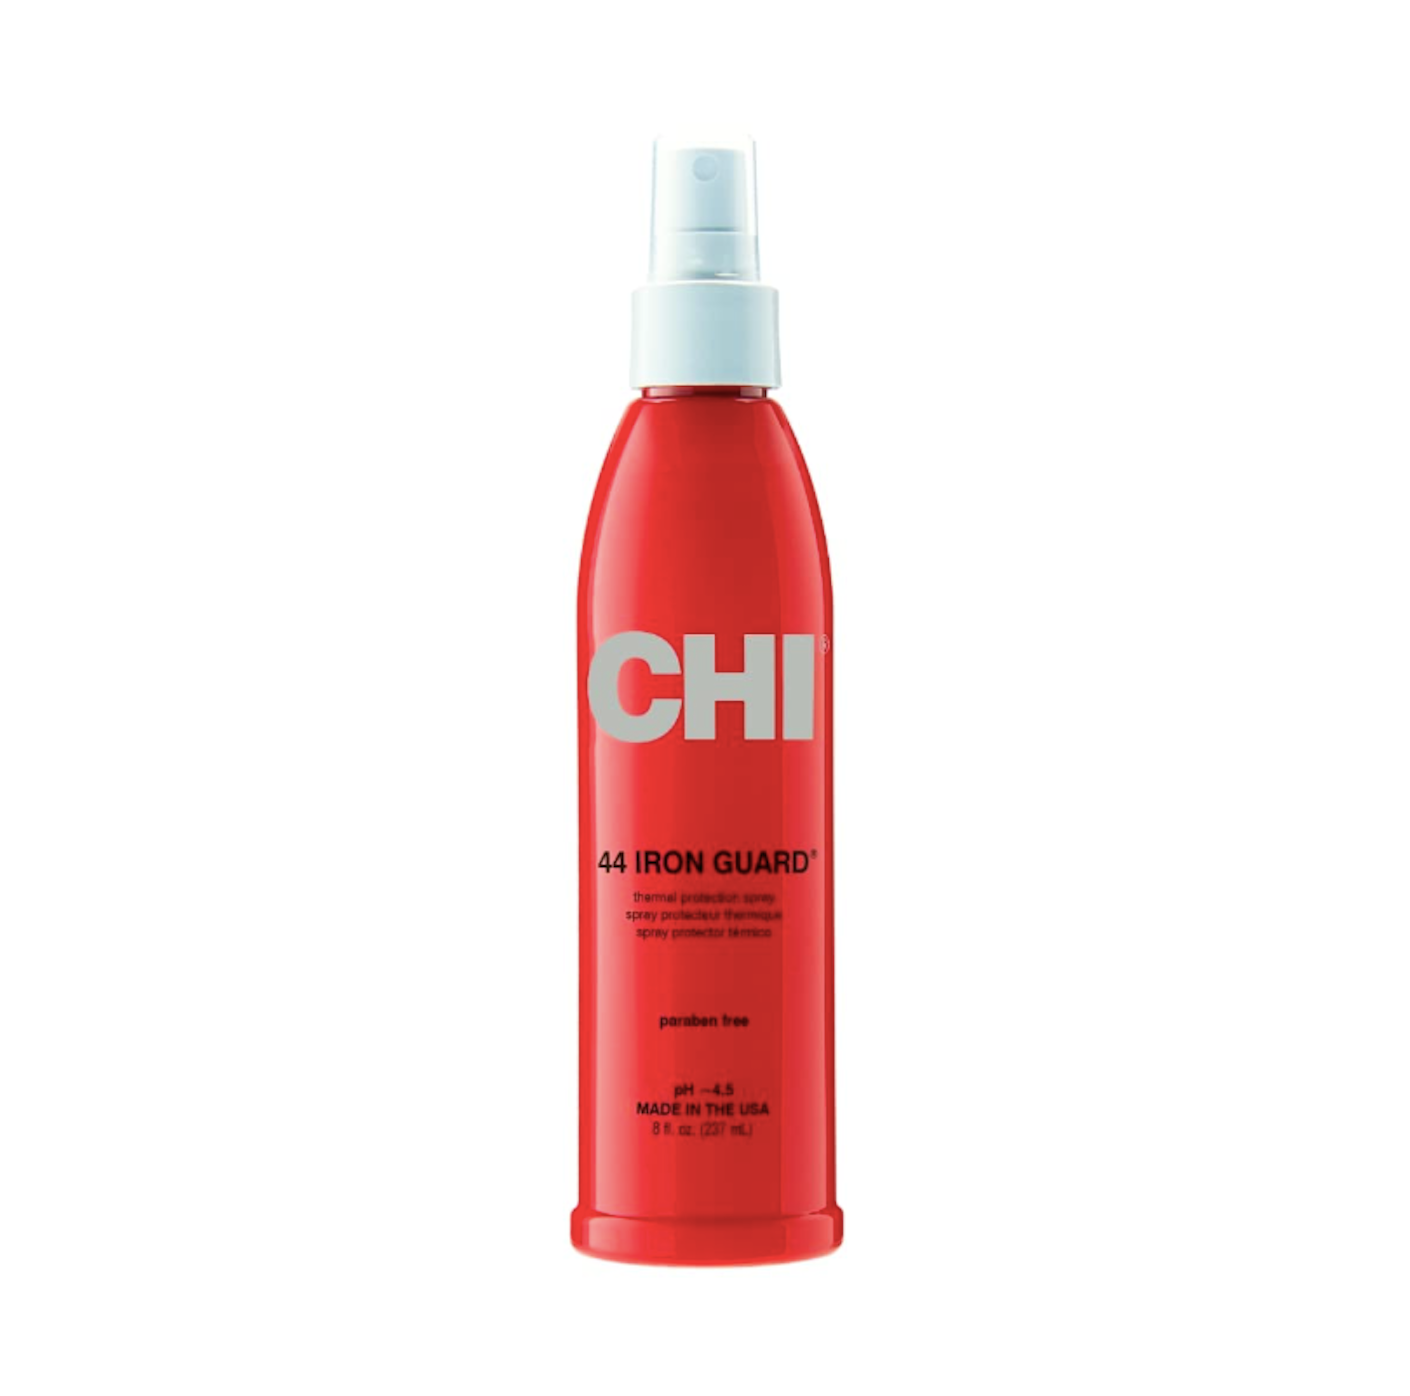 A bottle of hair heat protectant